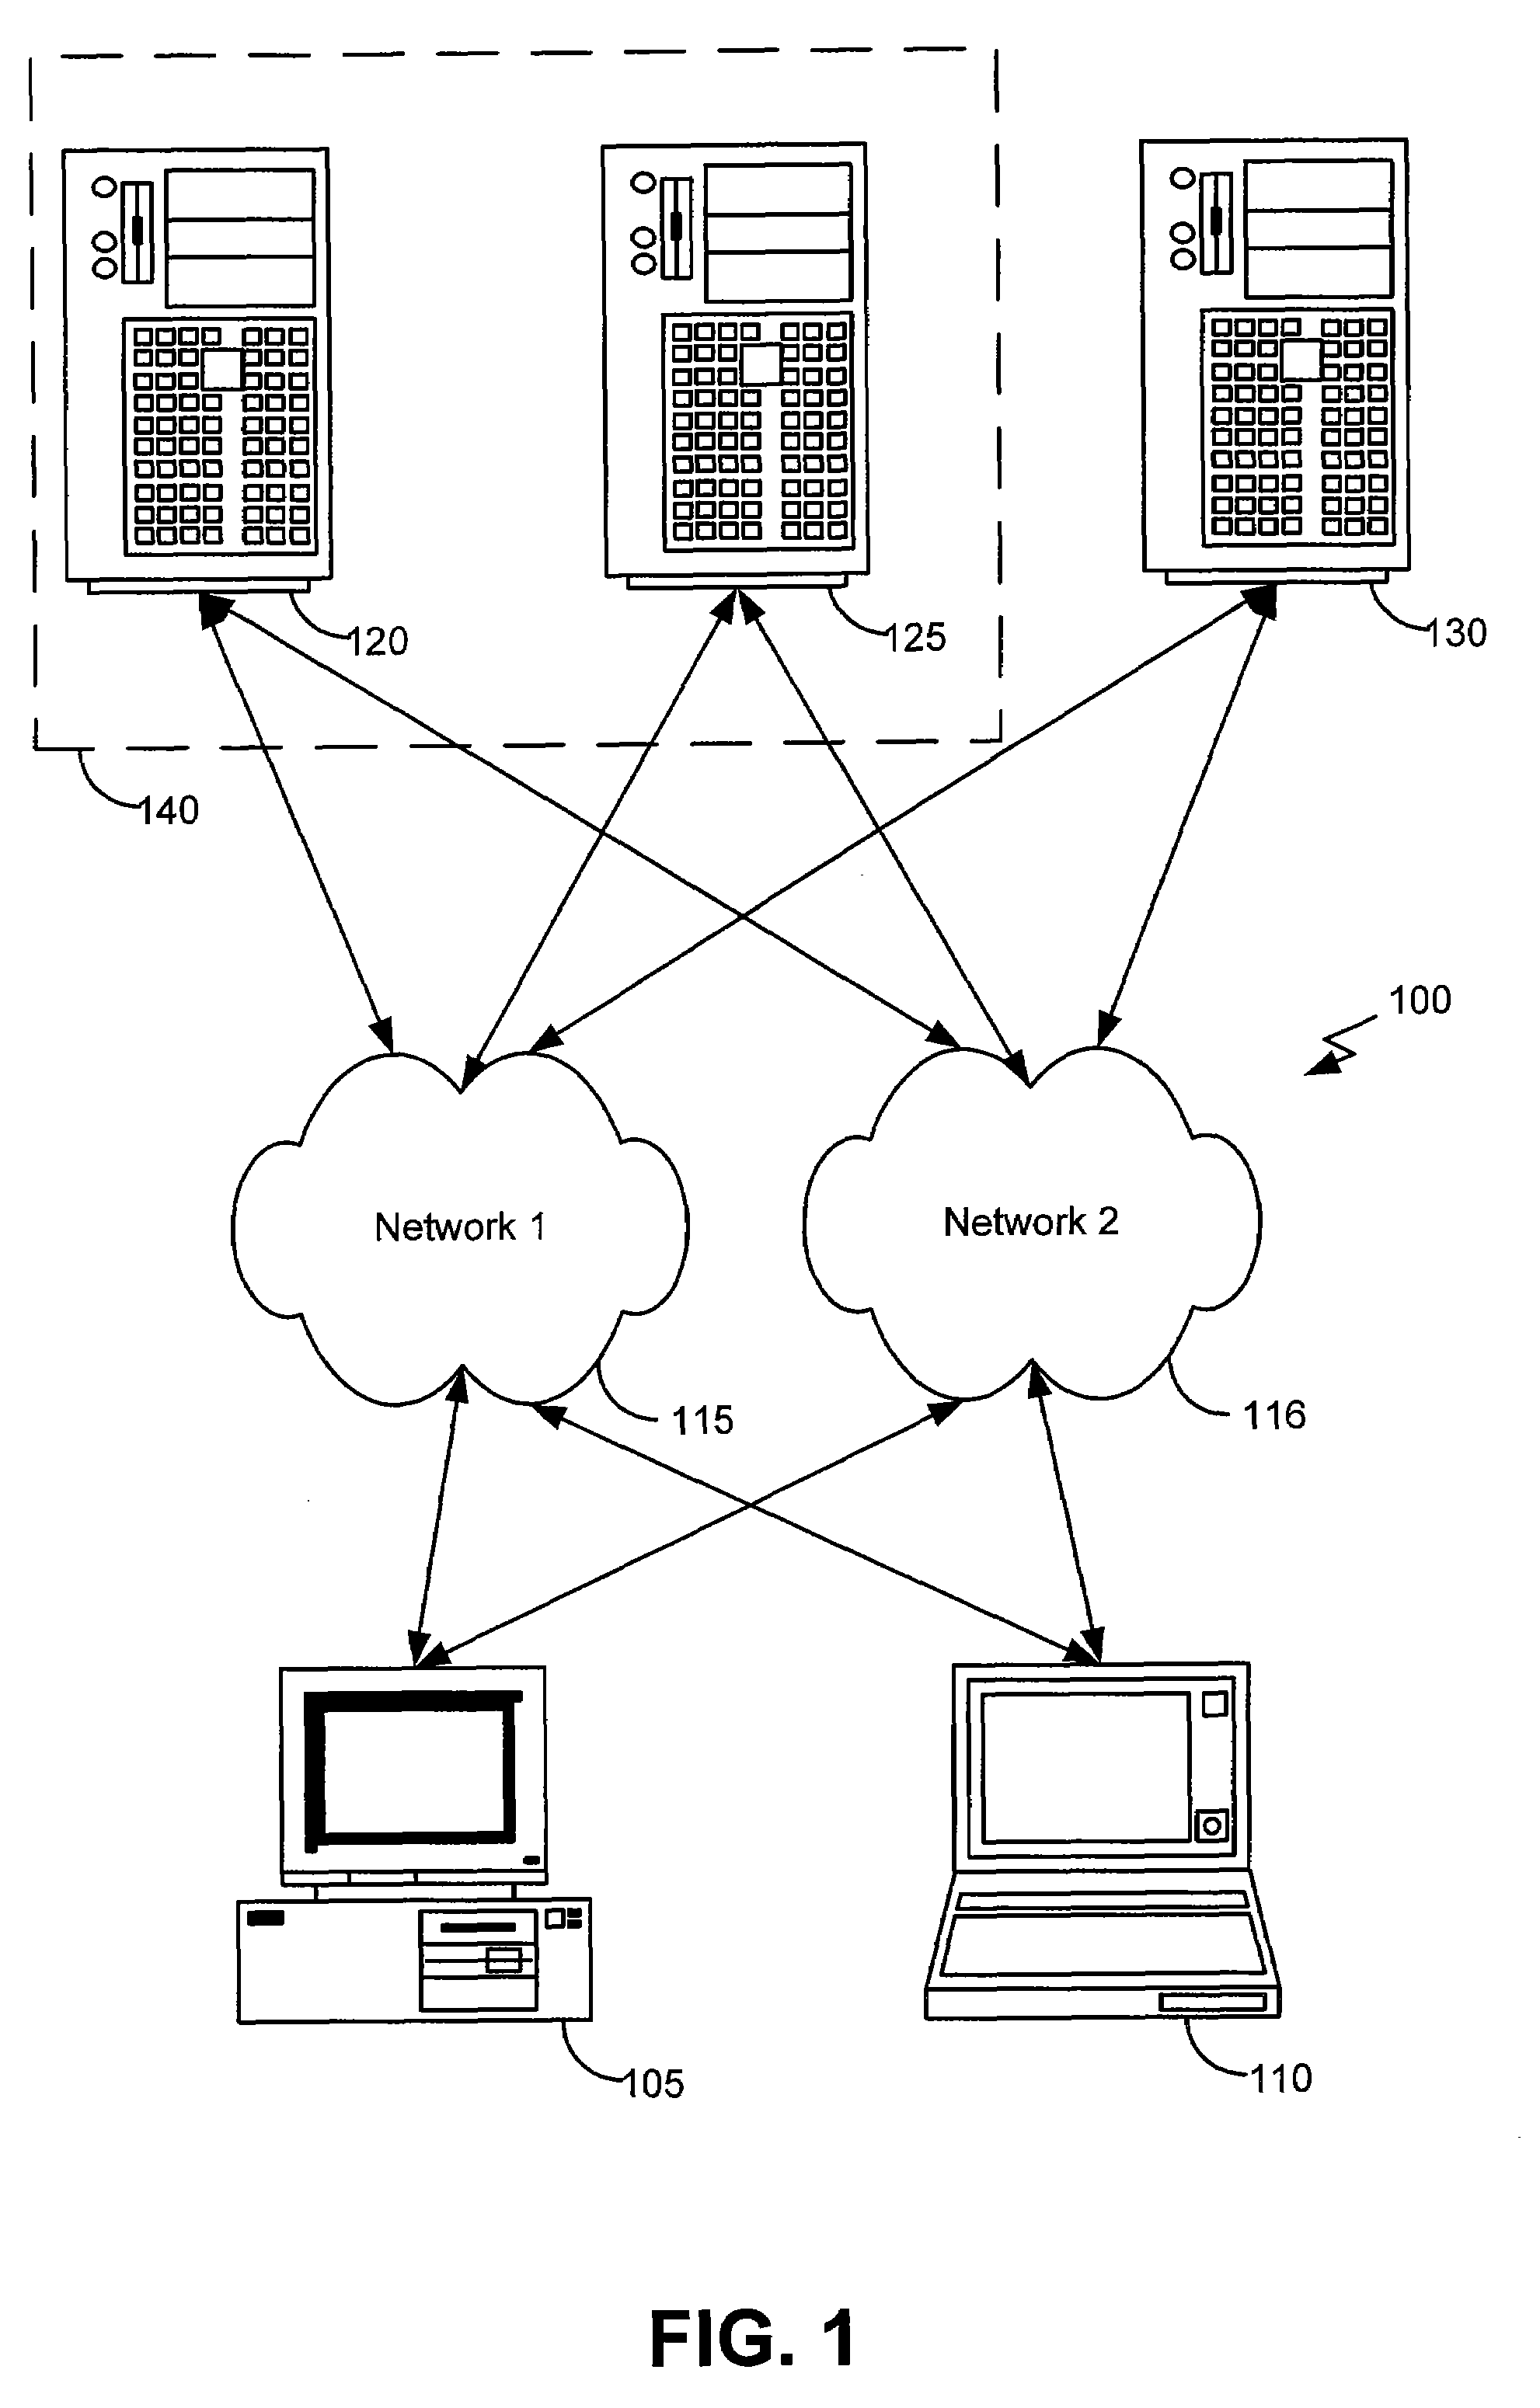 System using session initiation protocol for seamless network switching in a media streaming session